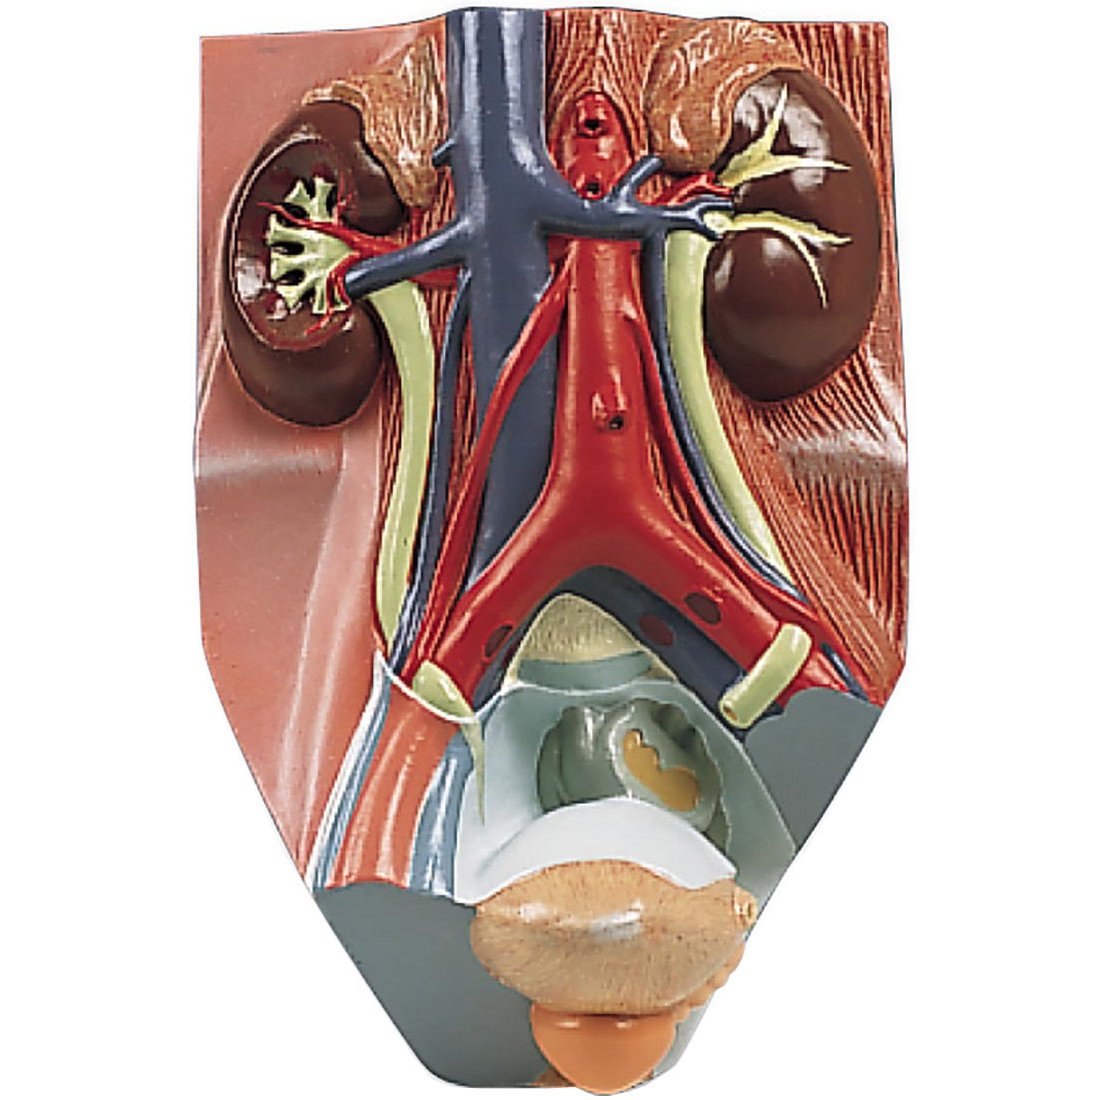 3b Scientific Ve325 Male Urinary System Model Male 3 4x Life Size